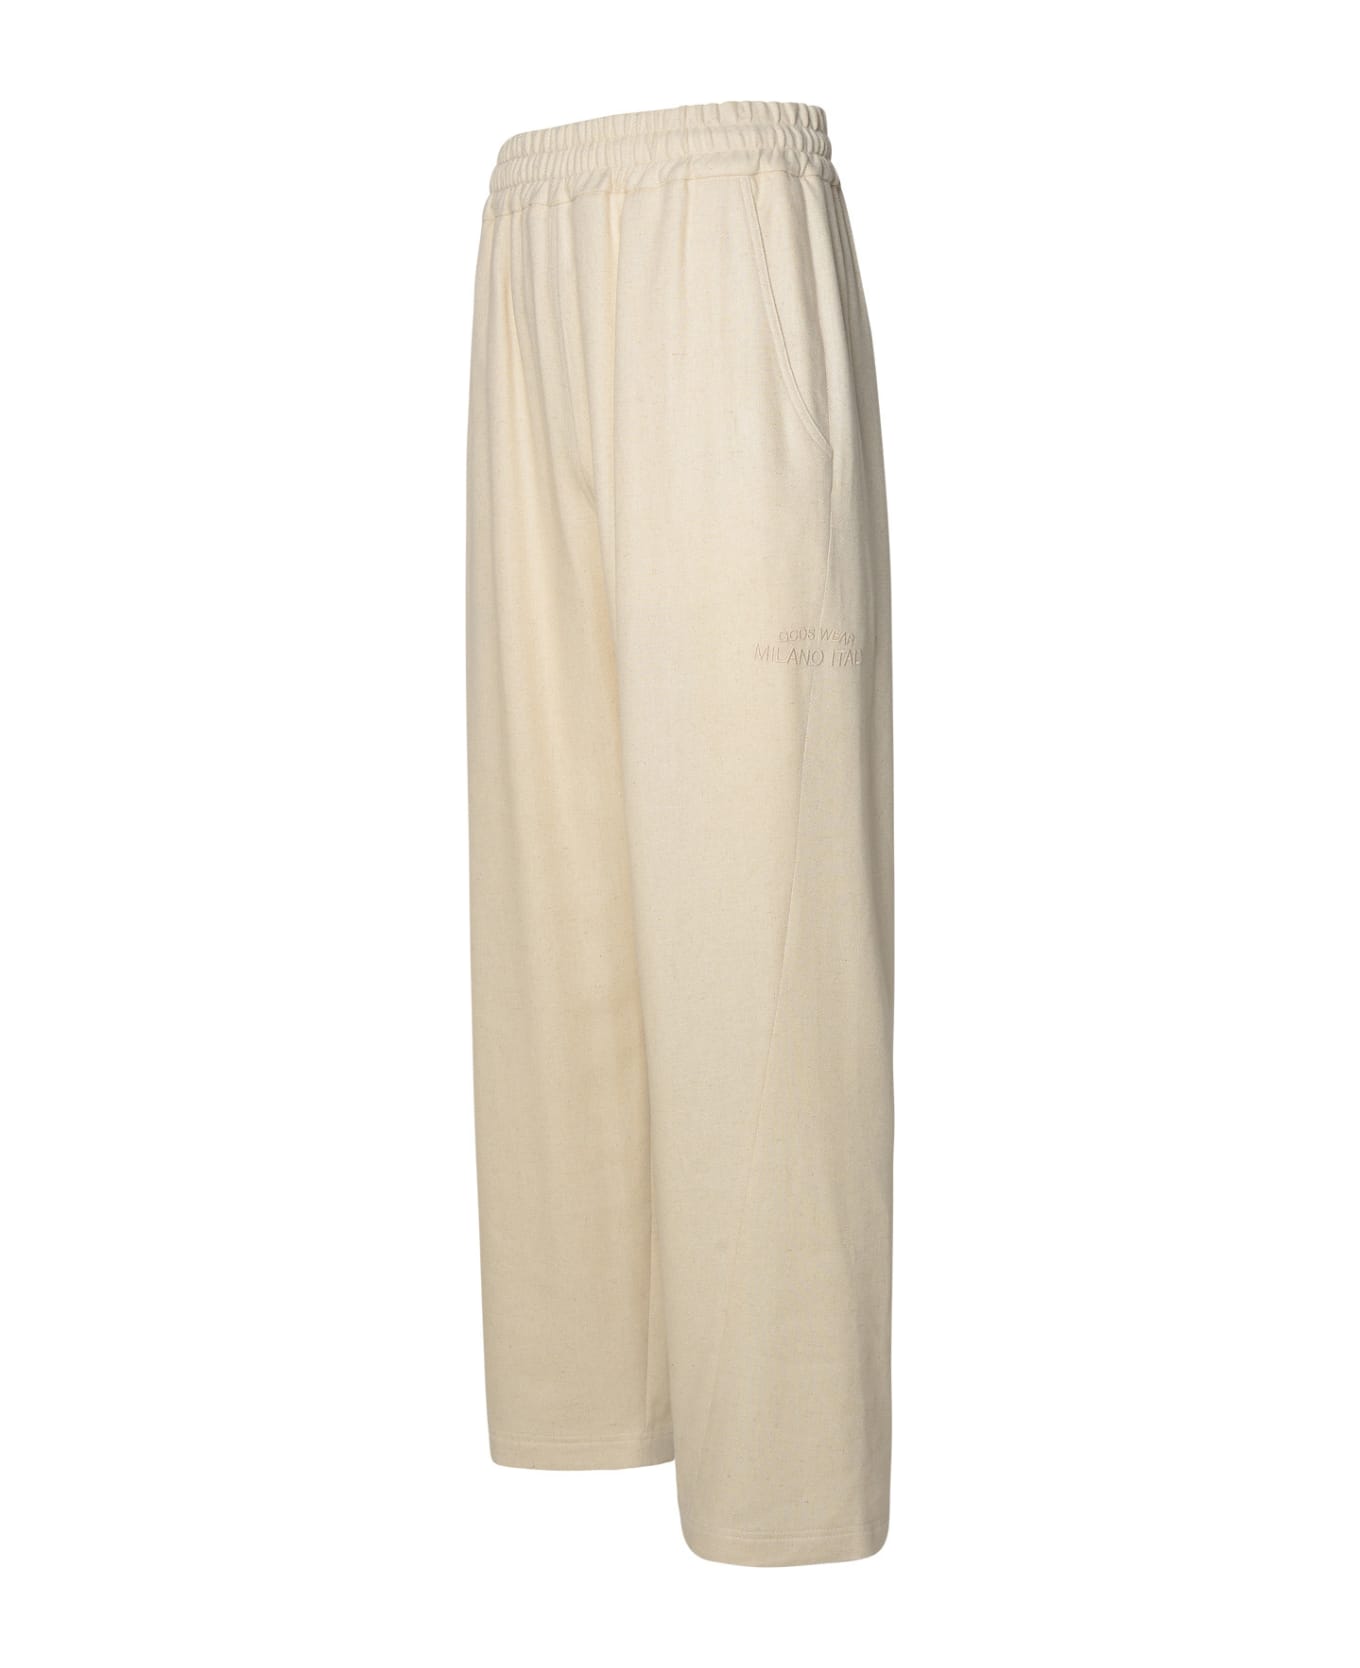 GCDS Ivory Linen Blend Trousers - Off White ボトムス